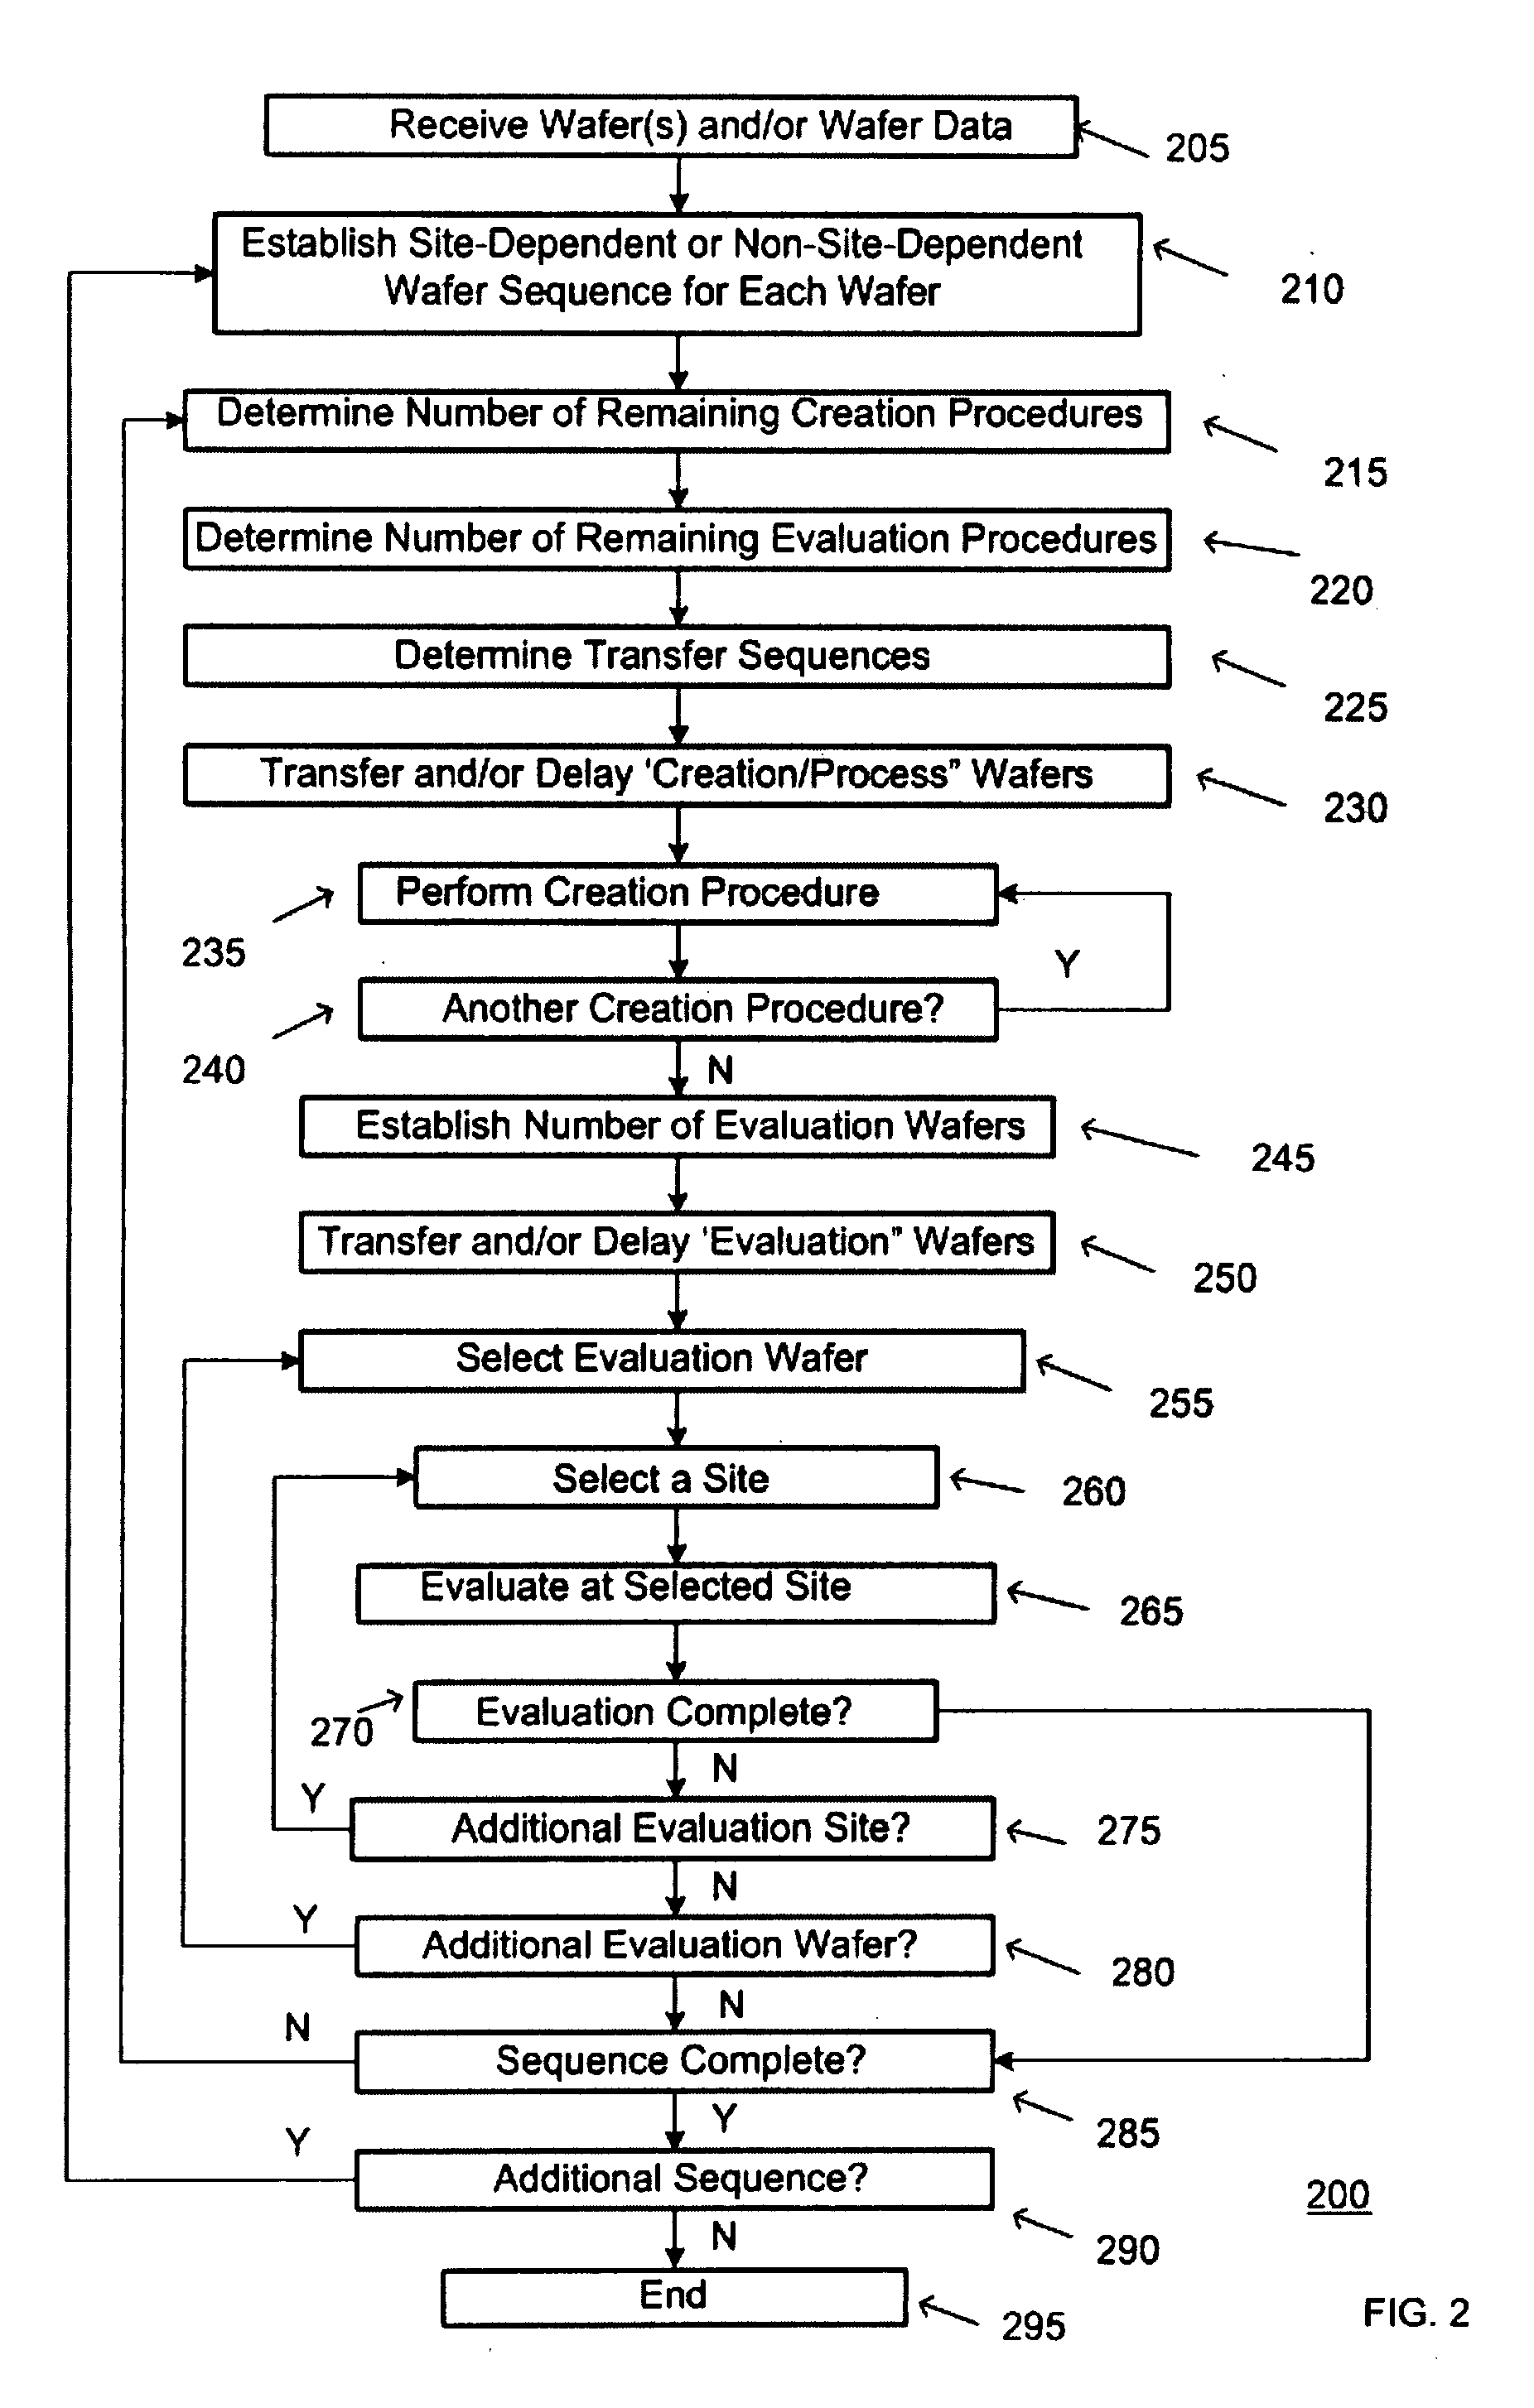 Method and apparatus for creating a site-dependent evaluation library